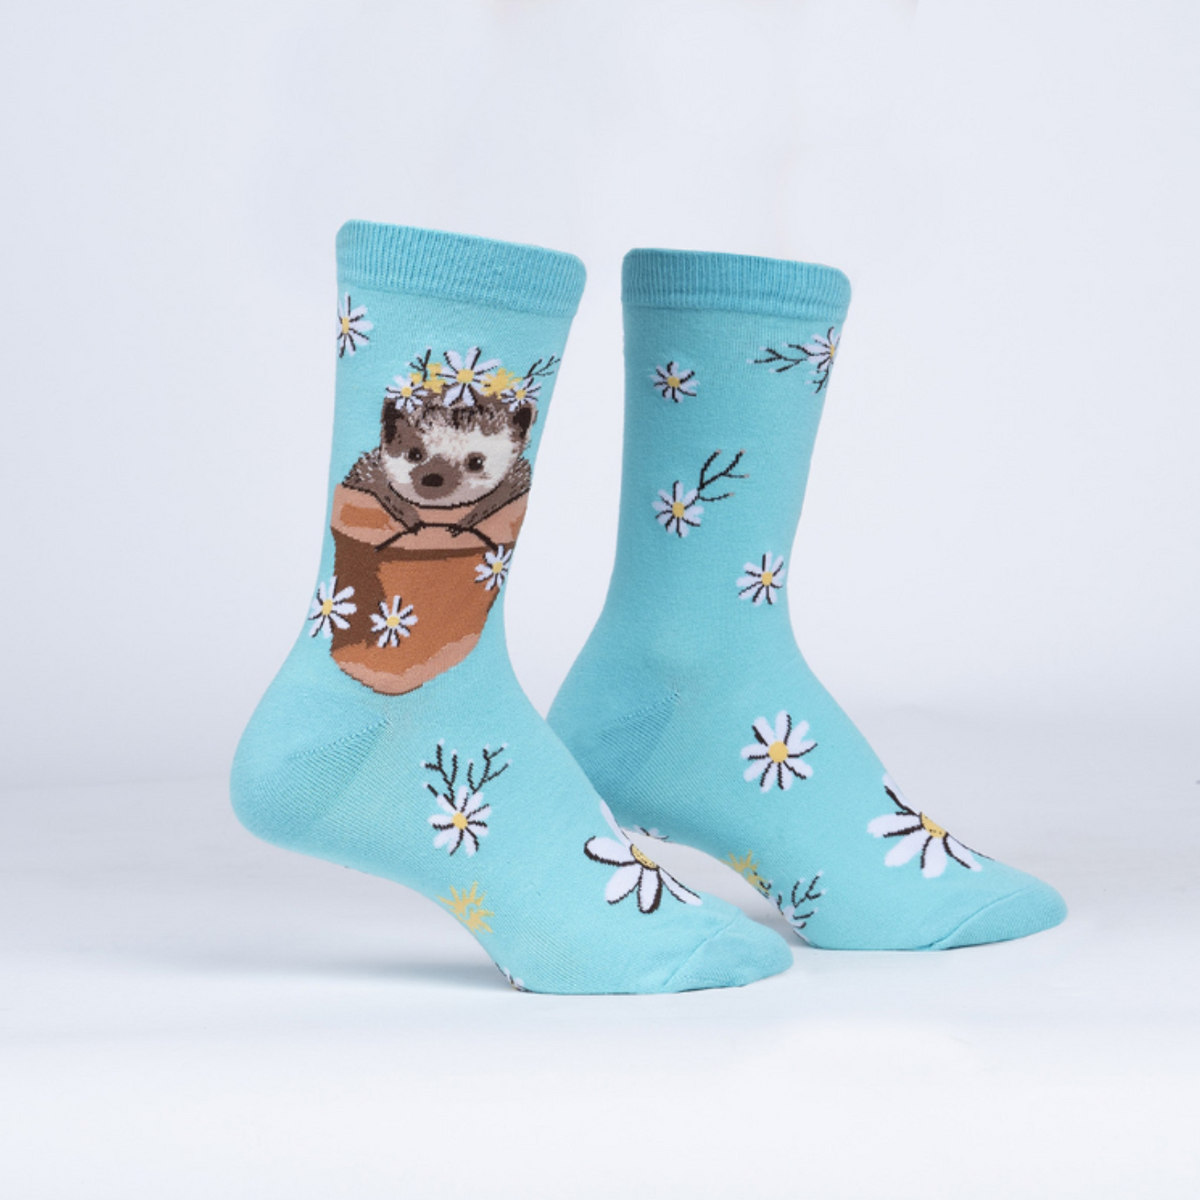 Sock It To Me My Dear Hedgehog women&#39;s crew sock featuring light blue sock with flowers all over and a hedgehog in a flower pot. Socks shown on display feet. 